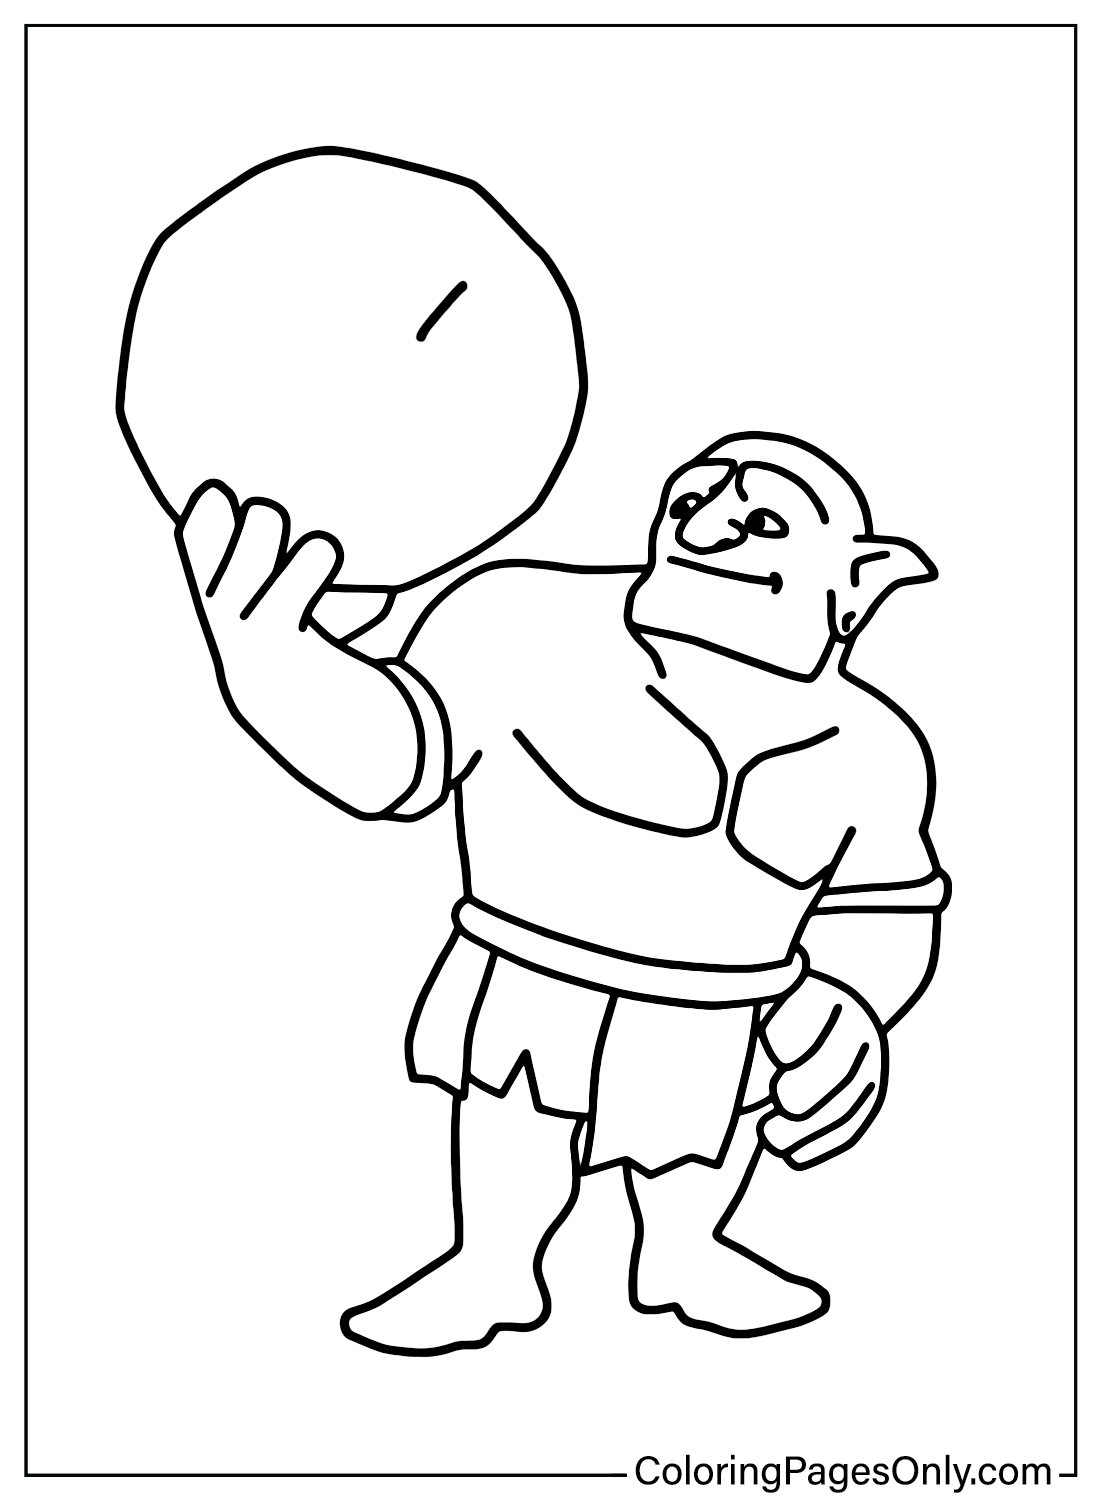 Bowler Clash of Clans Coloring Pages from Clash of Clans